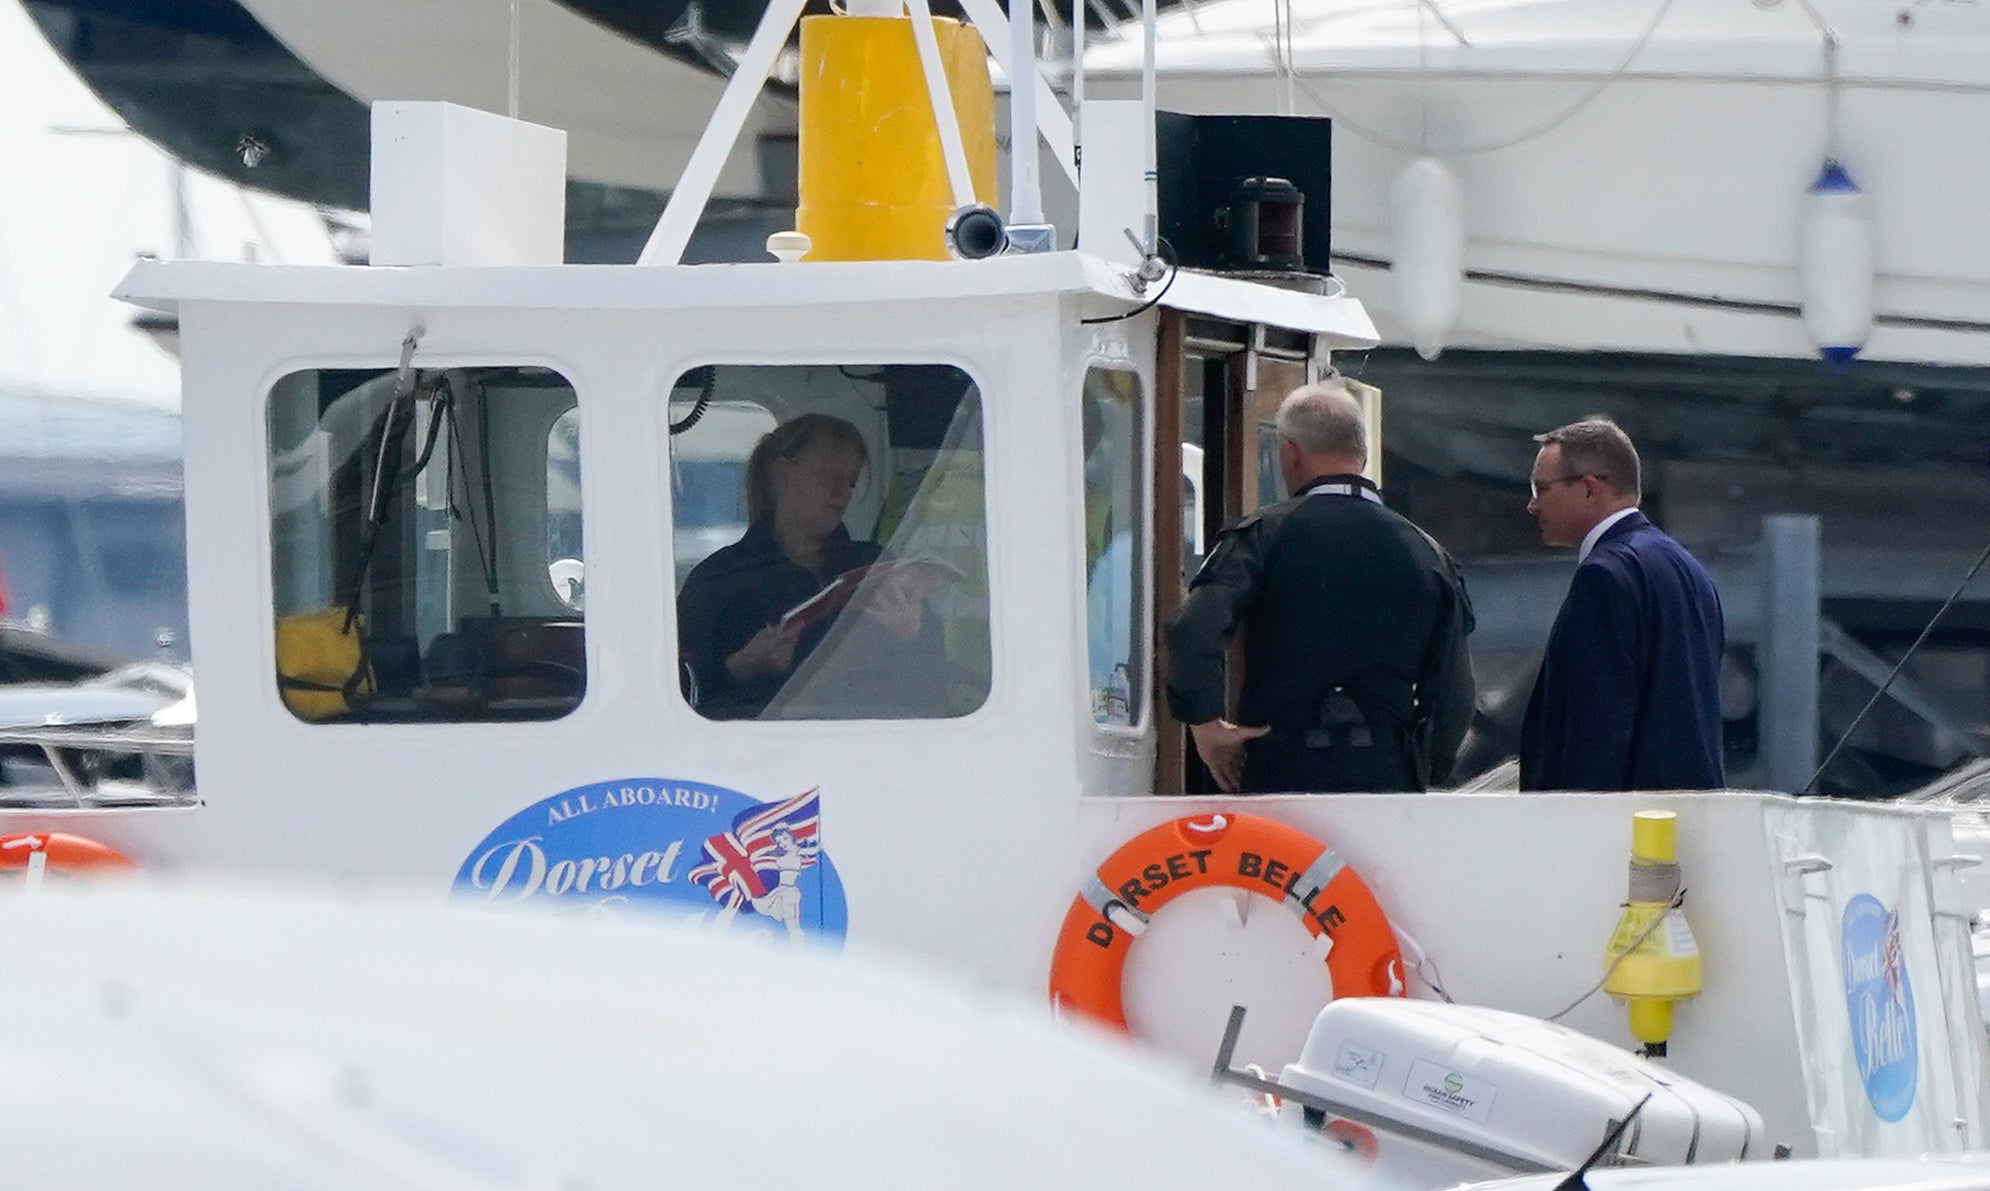 Inspections of the Dorset Belle cruise boat, impounded in Poole